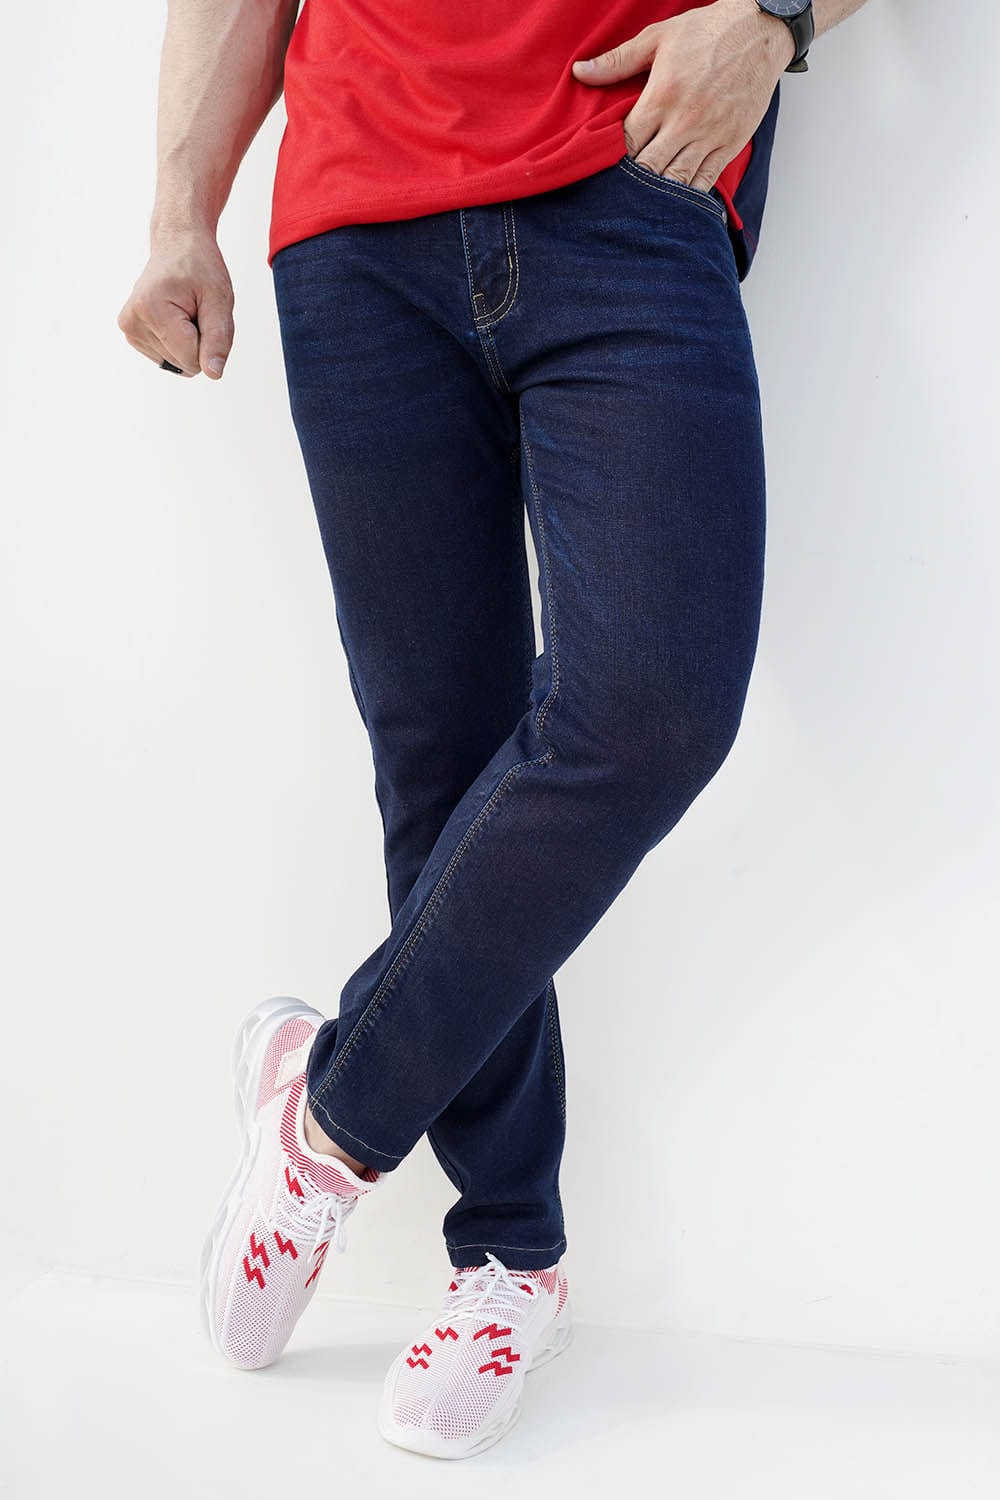 Hope Not Out by Shahid Afridi Men Jeans Slim Fit Jeans